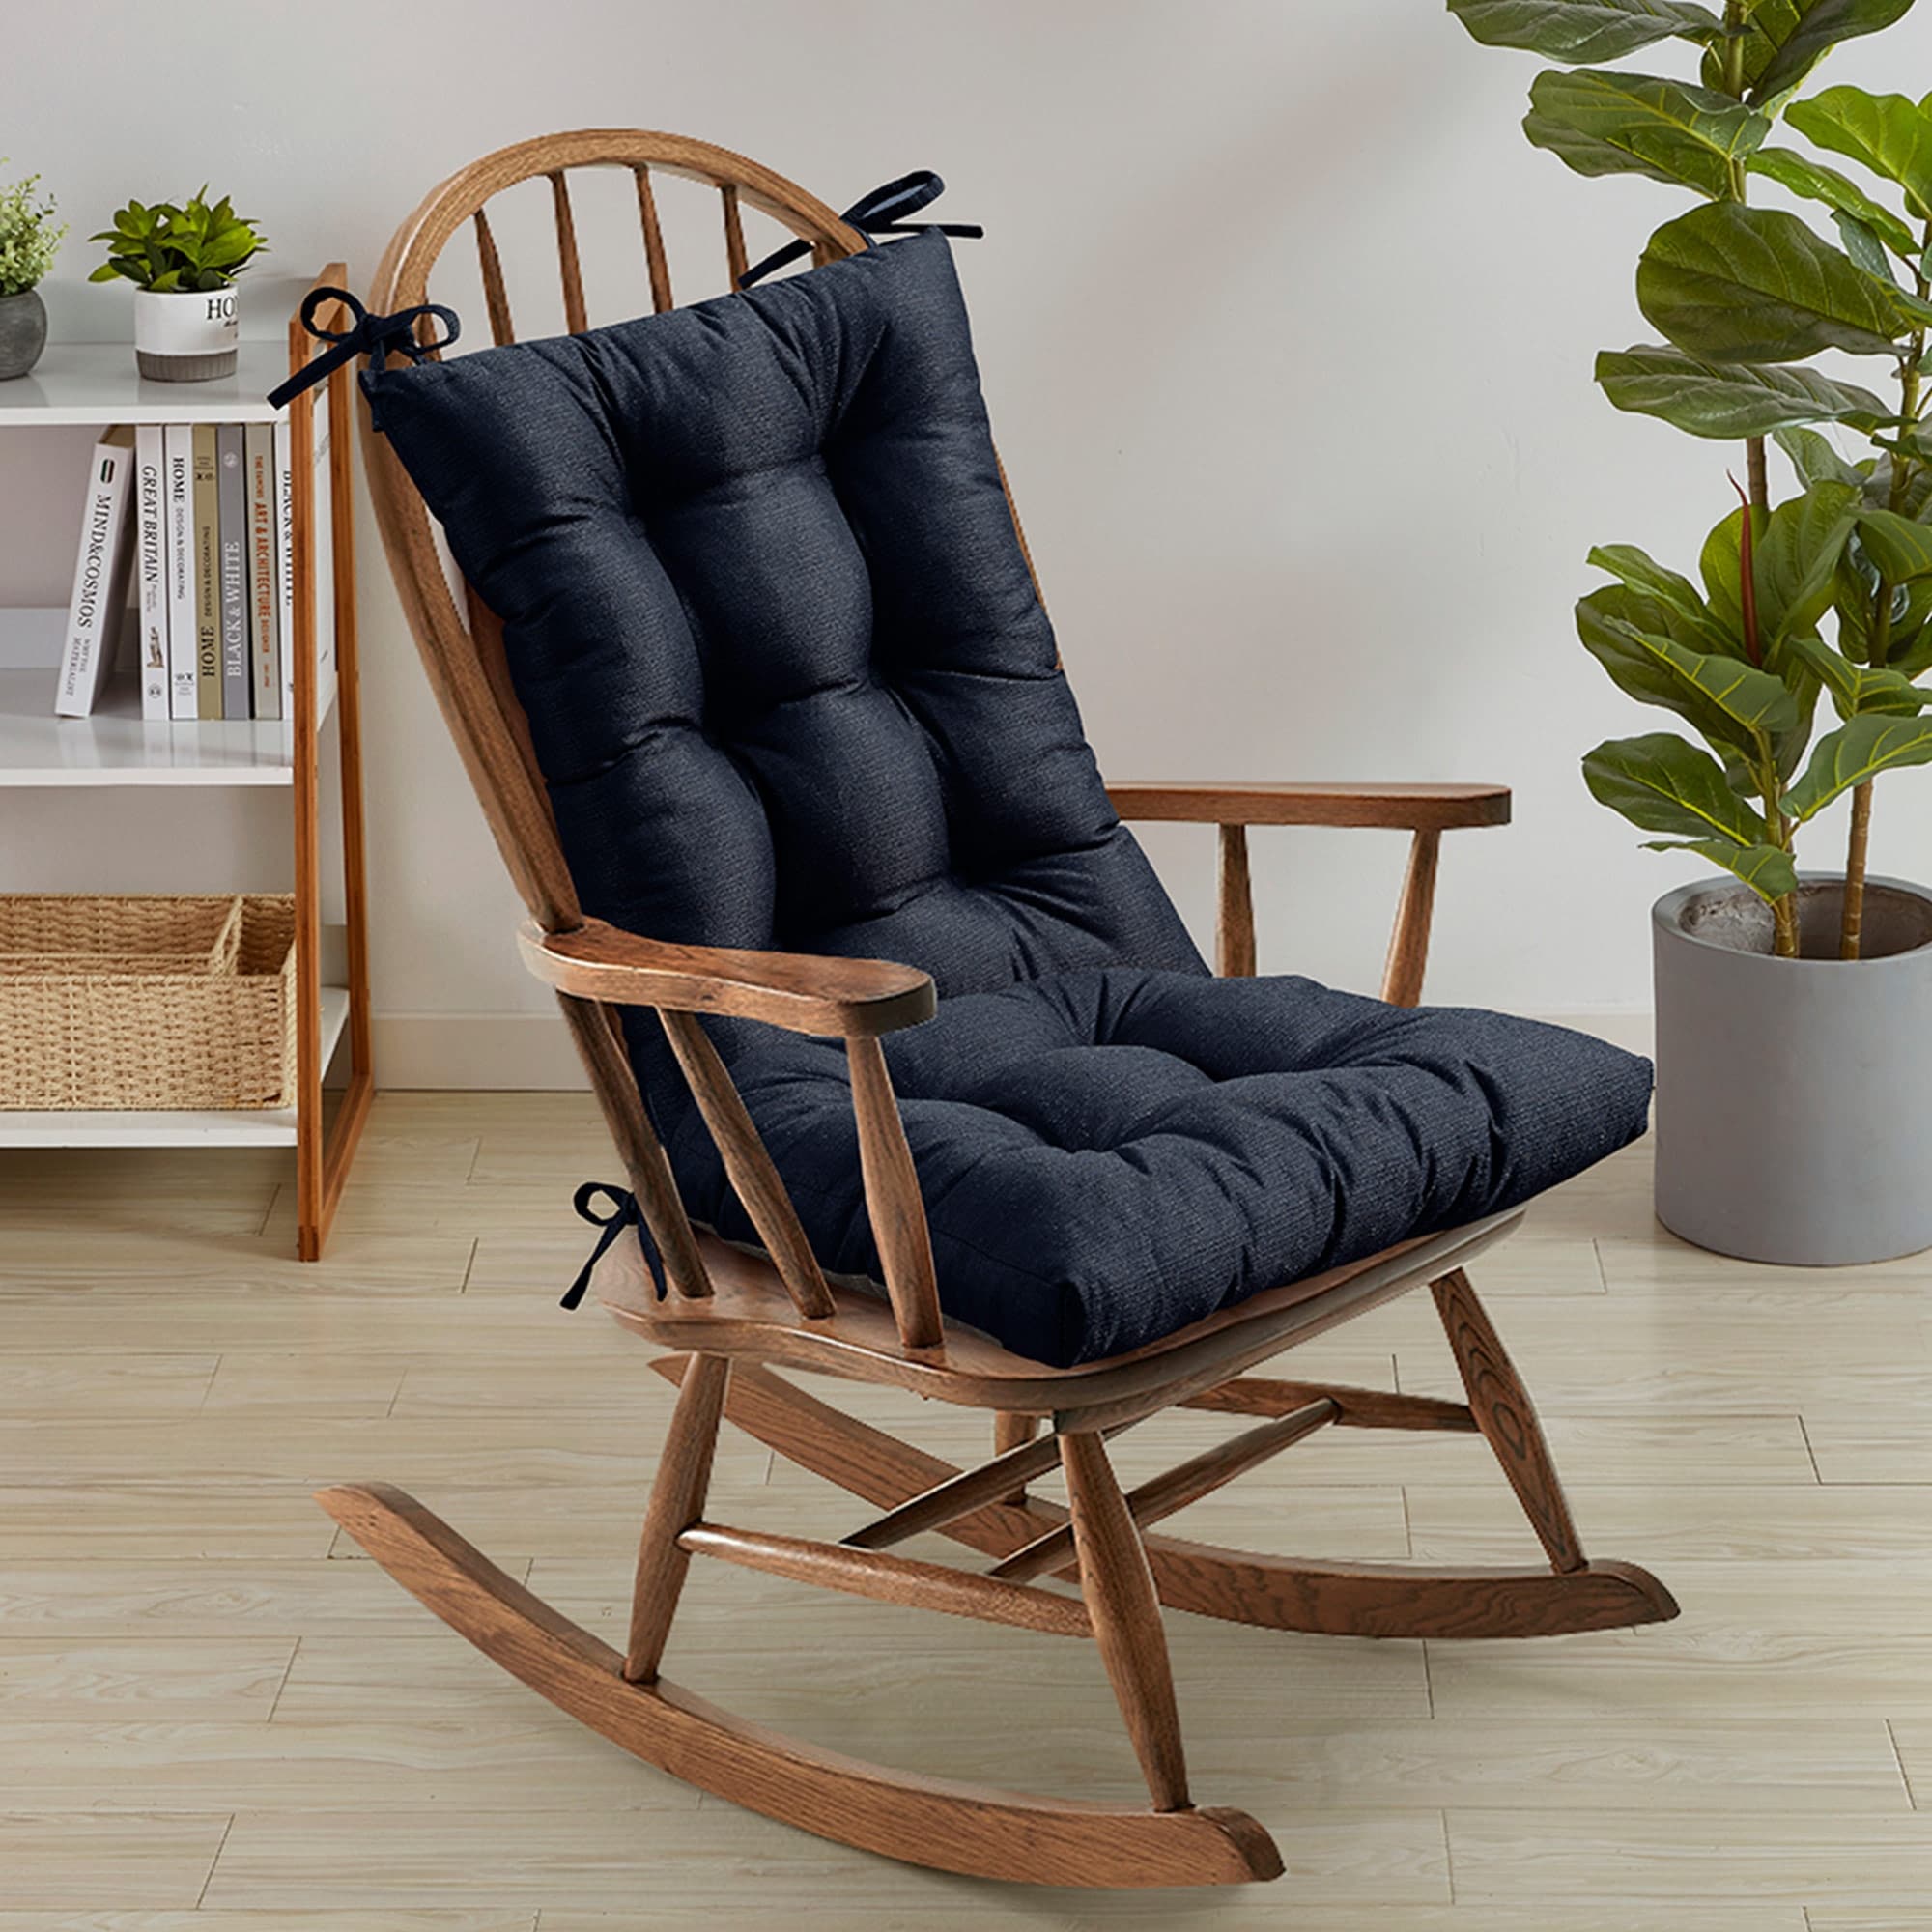 https://ak1.ostkcdn.com/images/products/is/images/direct/3f157b1f2b884499f8553f78d9de2b4e1d5abc1f/Sweet-Home-Collection-Rocking-Chair-Cushion-Set.jpg